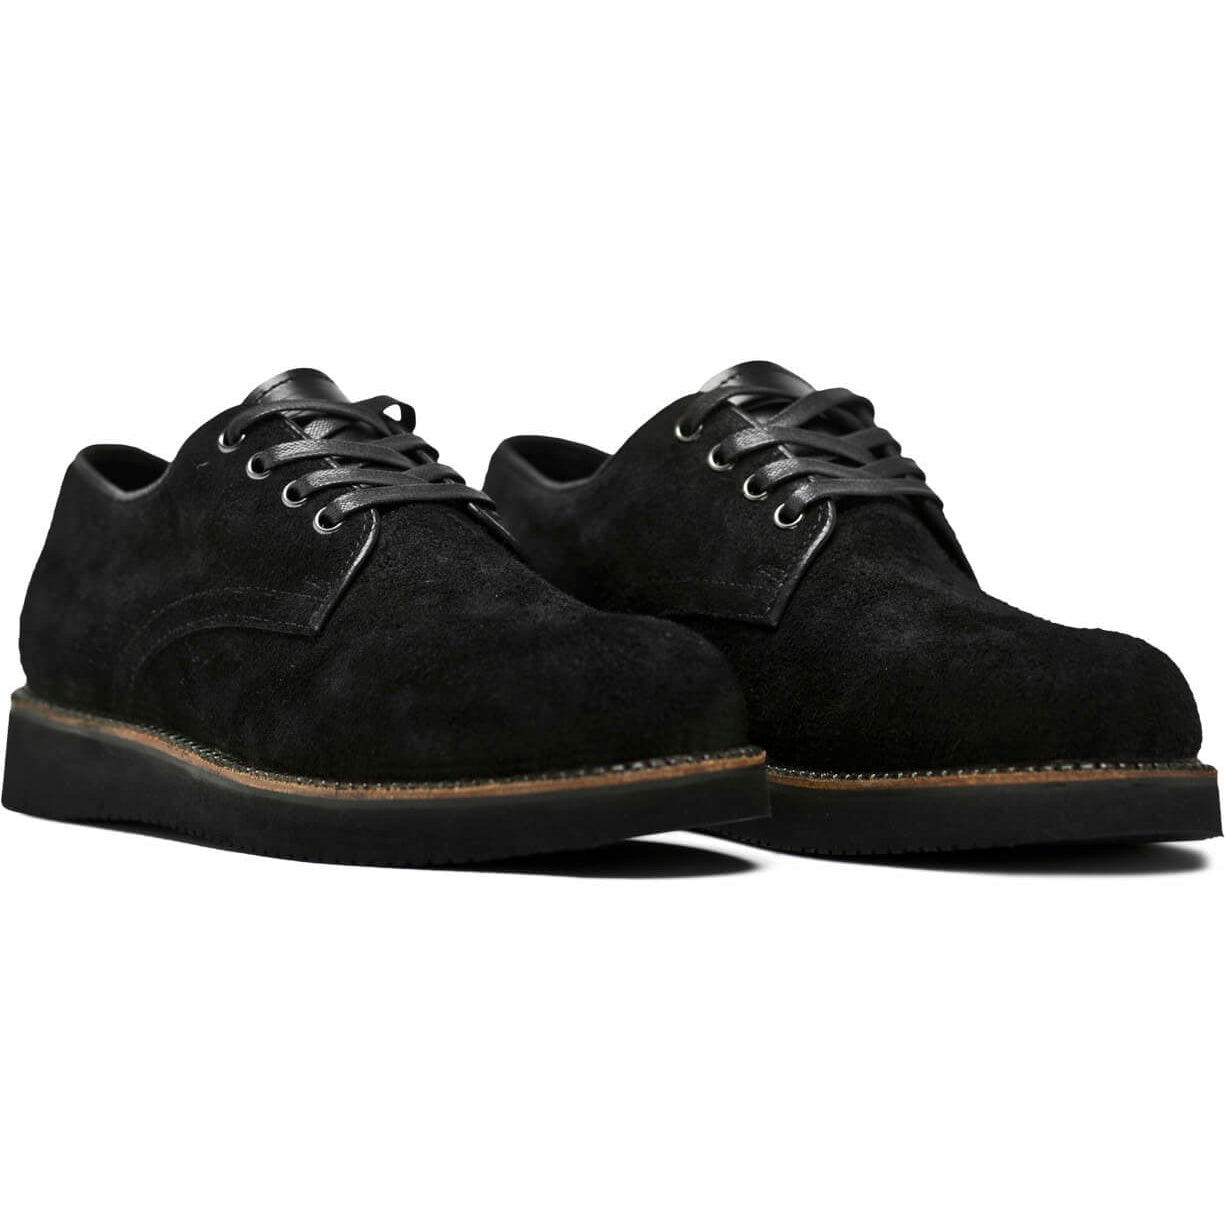 A pair of Broken Homme Michael II black suede shoes featuring pinpoint construction details and an oxford silhouette, showcased against a pristine white background.